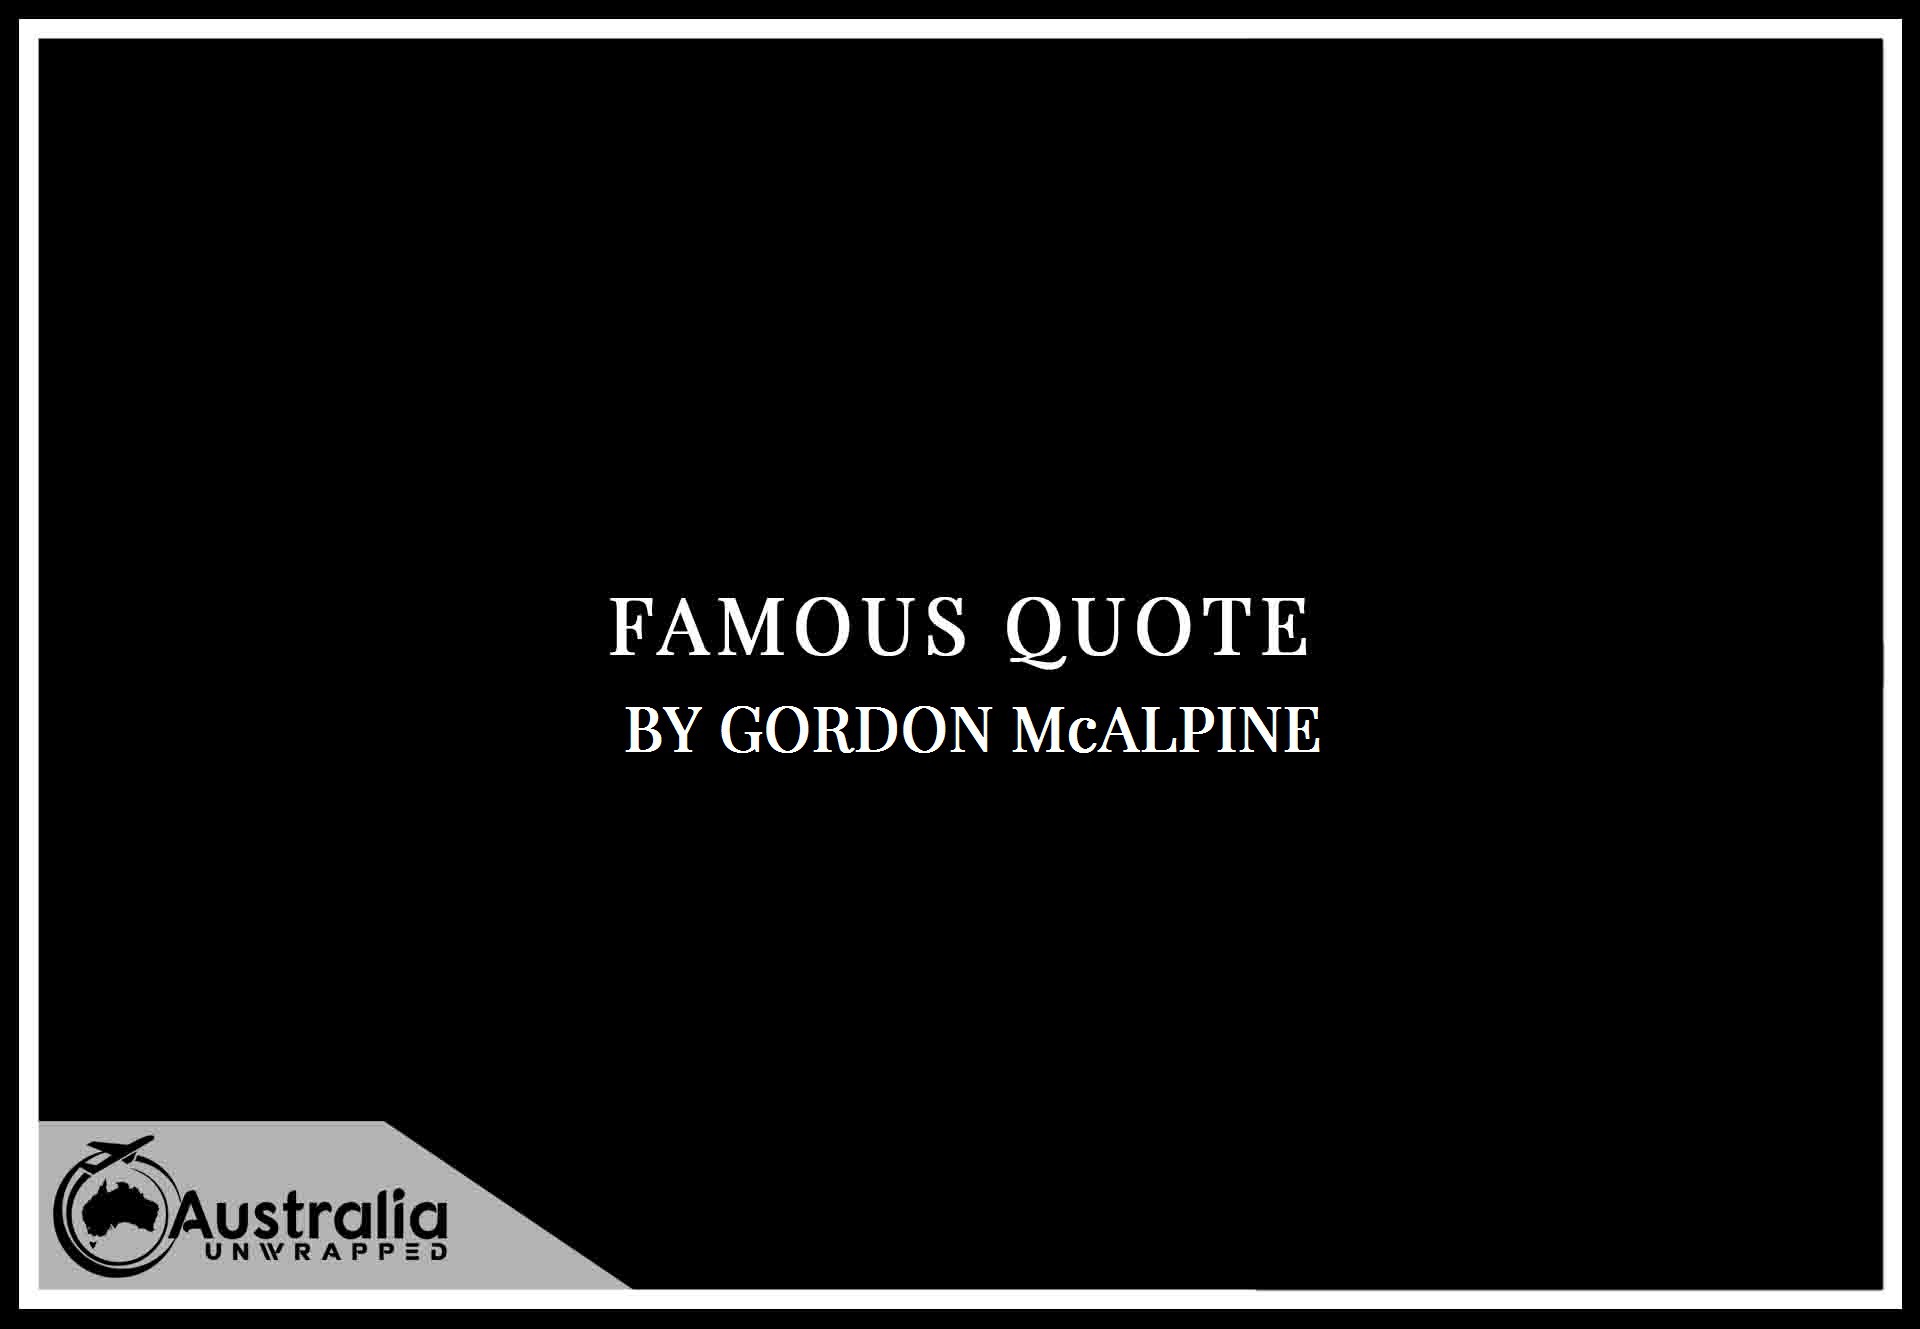 Gordon McAlpine’s Top 1 Popular and Famous Quotes